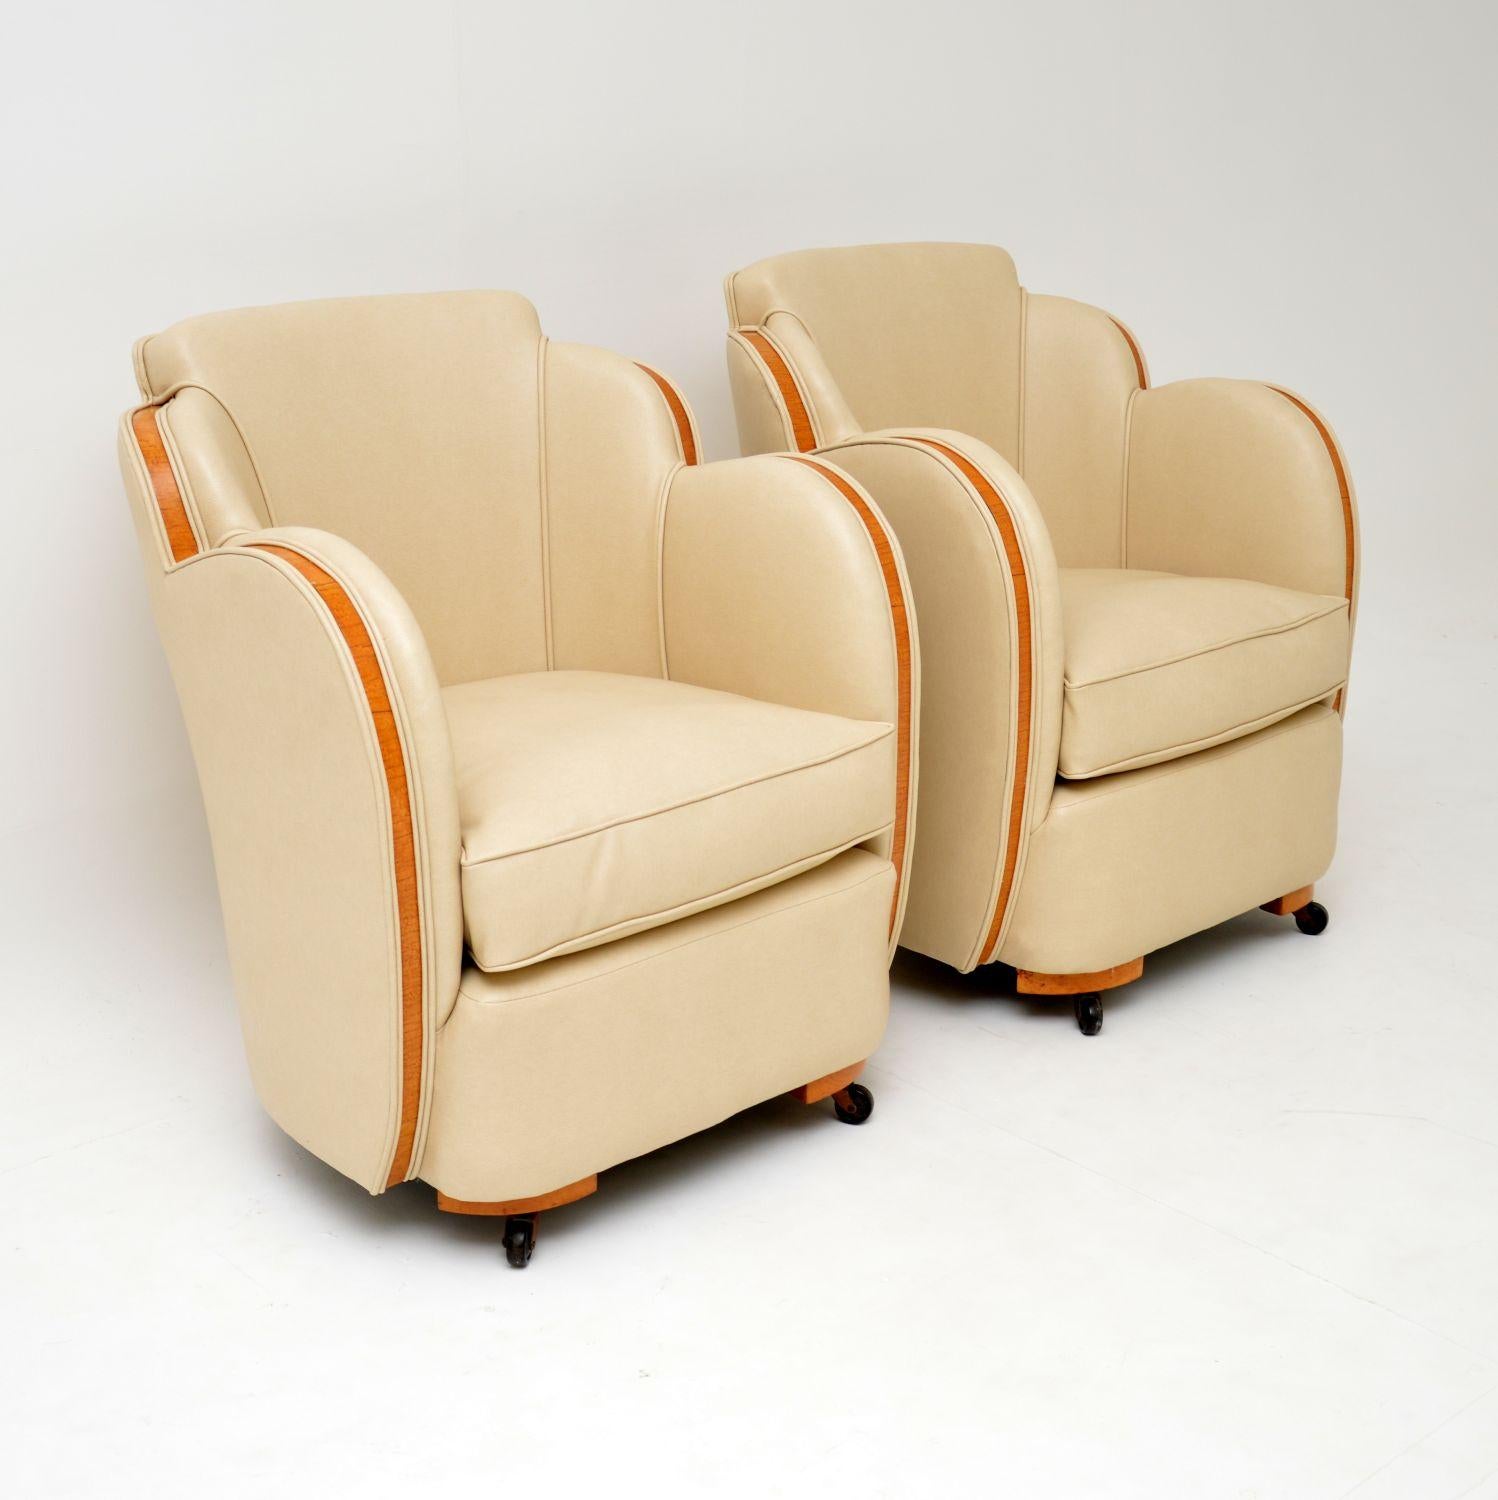 English Pair of Original Art Deco Cloud Back Armchairs by Epstein